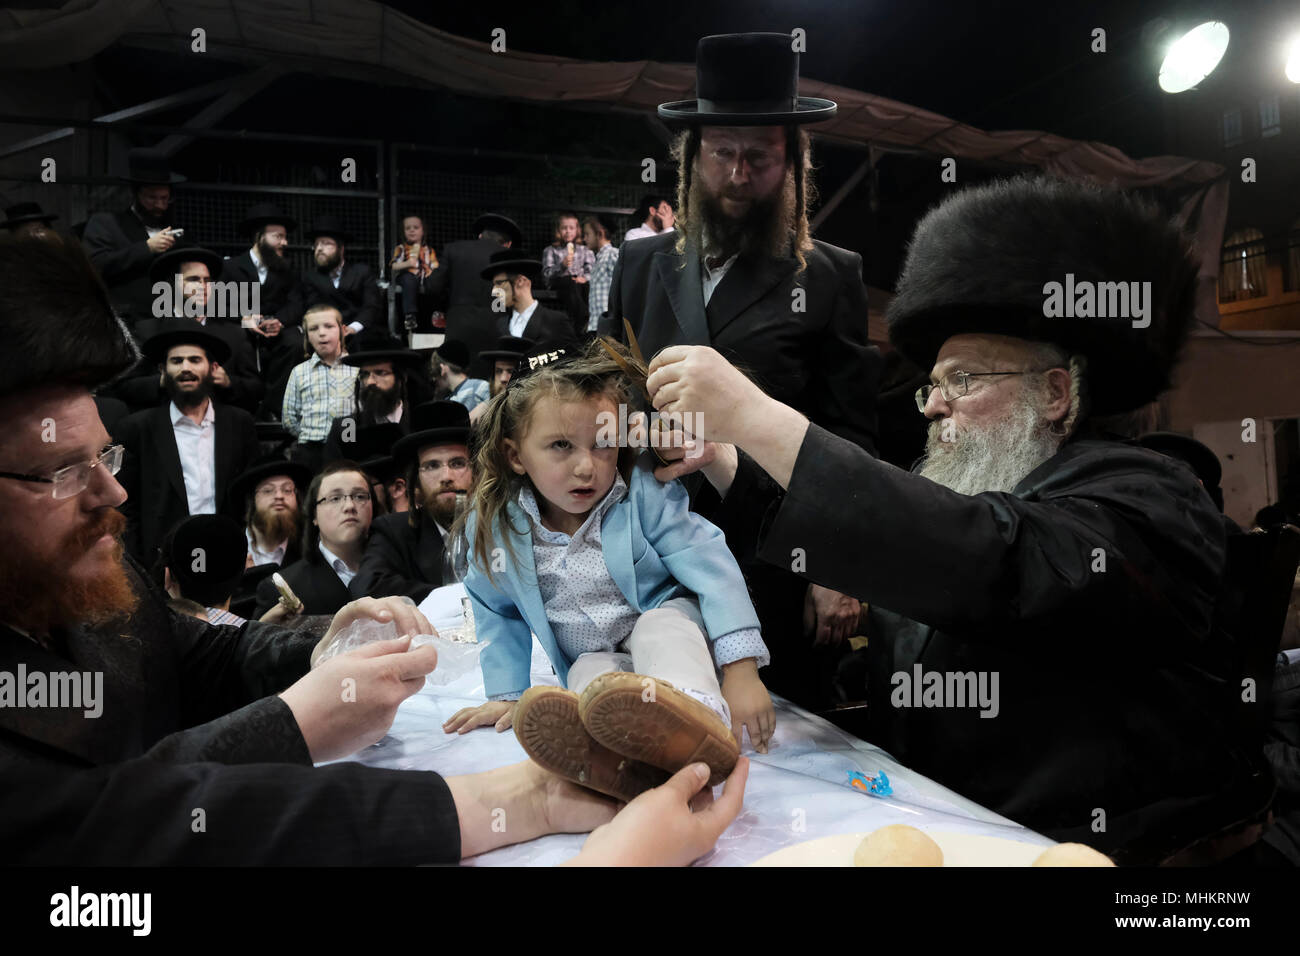 Jerusalem, Israel 02 May 2018. A three-year old Jewish boy takes part in the traditional Halake ceremony, a first hair cut from the Rabbi of the Pinsk-Karlin Hassidic dynasty in Geula religious neighborhood during the celebration of Lag BaOmer holiday which marks the celebration, interpreted by some as anniversary of death of Rabbi Shimon bar Yochai, one of Judaism's great sages some 1800 years ago and the day on which he revealed the deepest secrets of kabbalah a landmark text of Jewish mysticism Credit: Eddie Gerald/Alamy Live News Stock Photo